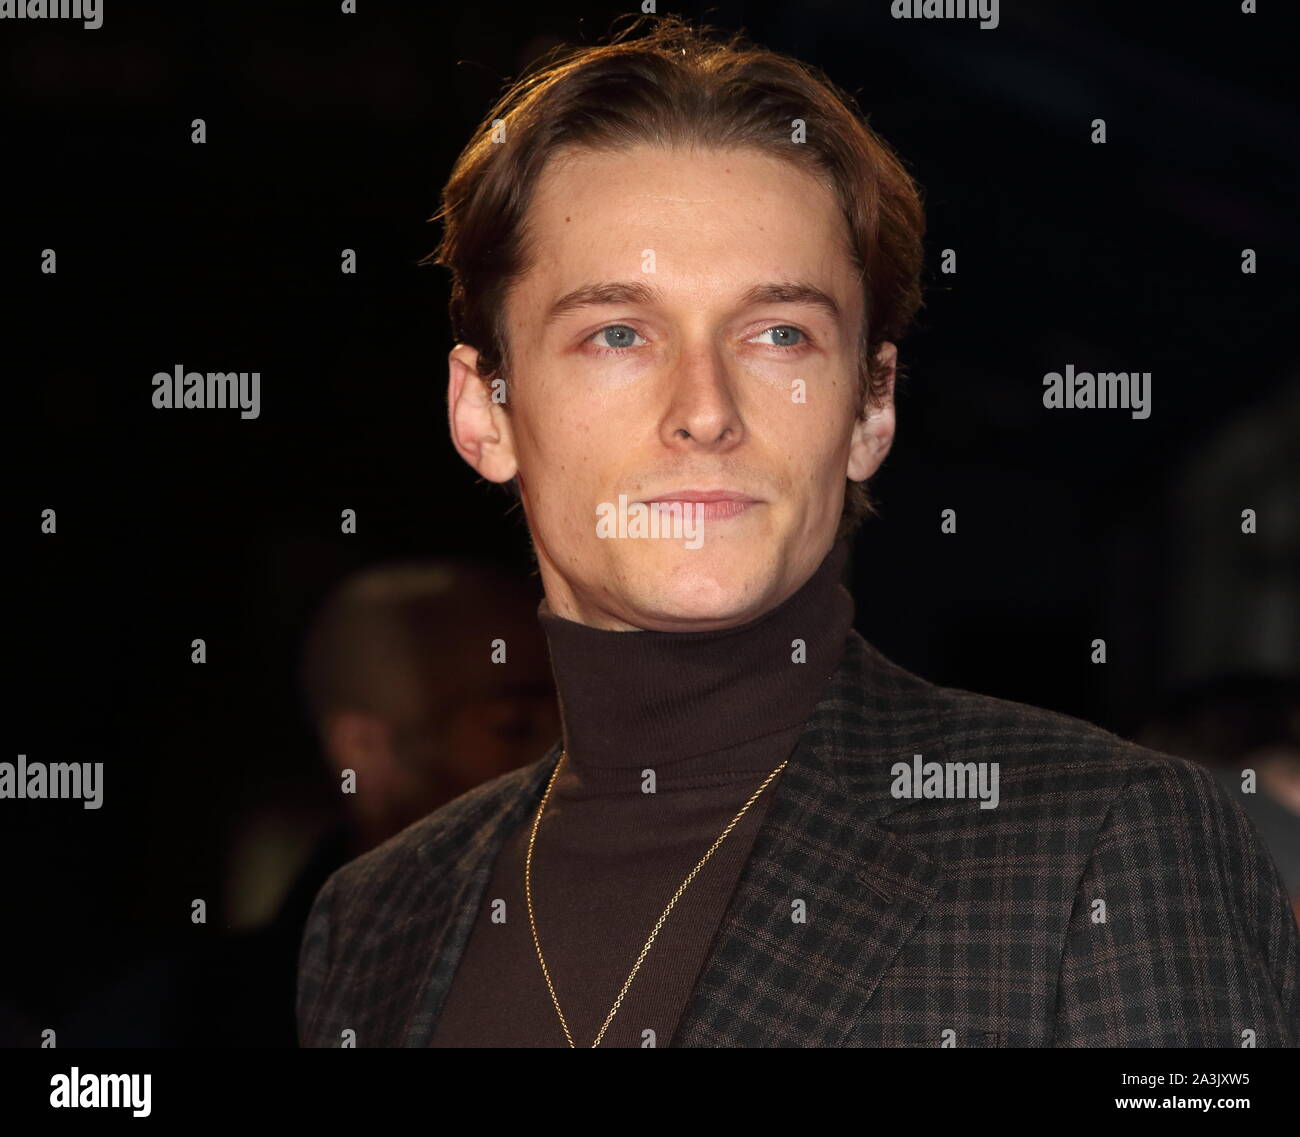 Jacob Collins Levy attends The BFI 63rd London Film Festival, American Express Gala screening of 'Knives Out held at the Odeon Luxe, Leicester Square in London. Stock Photo